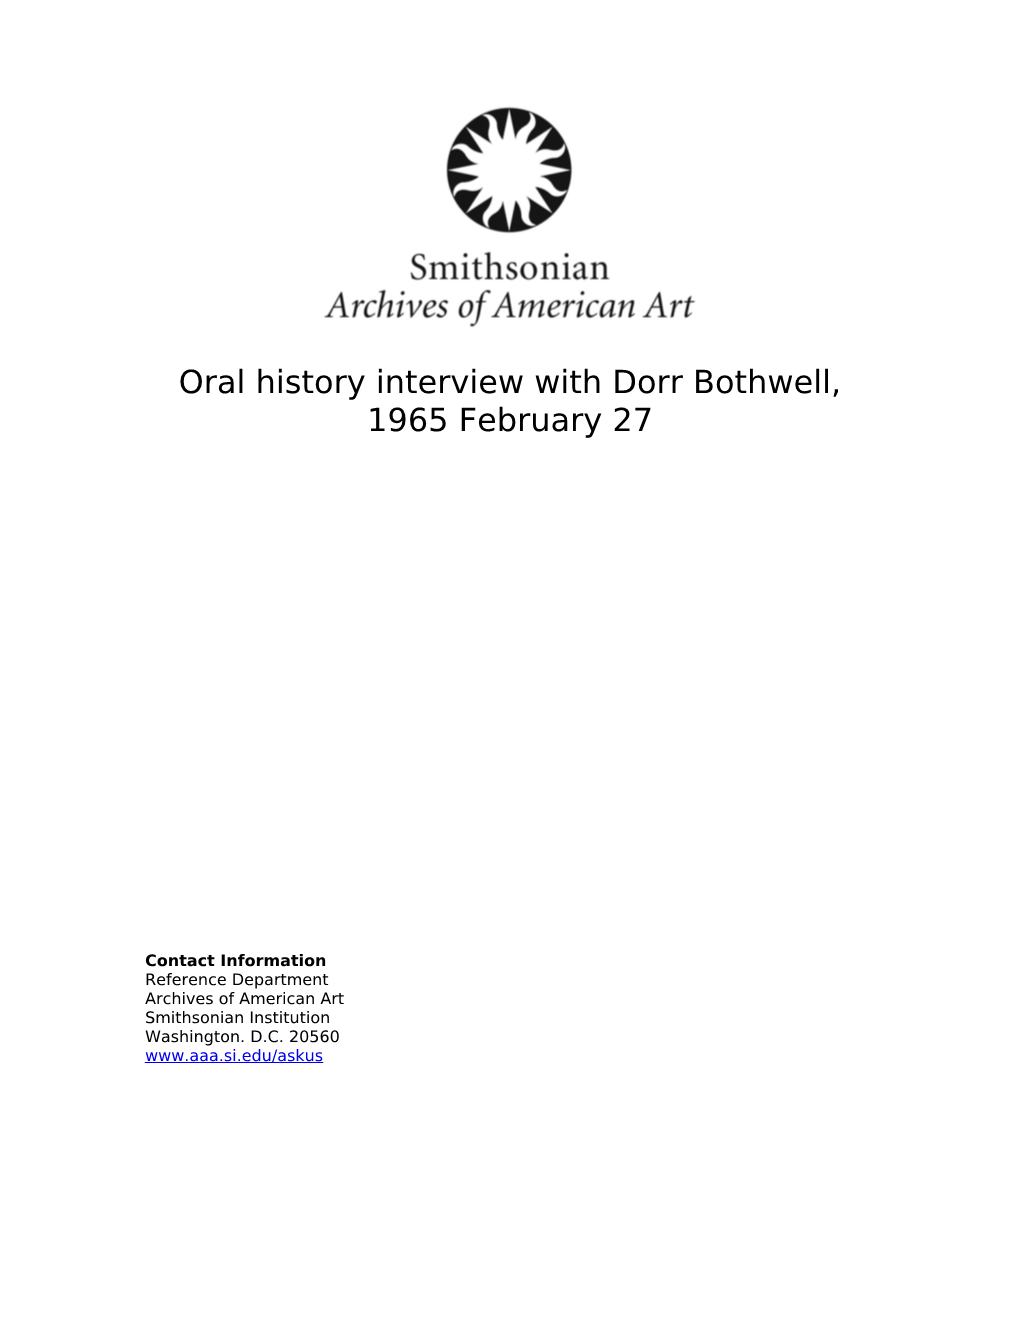 Oral History Interview with Dorr Bothwell, 1965 February 27